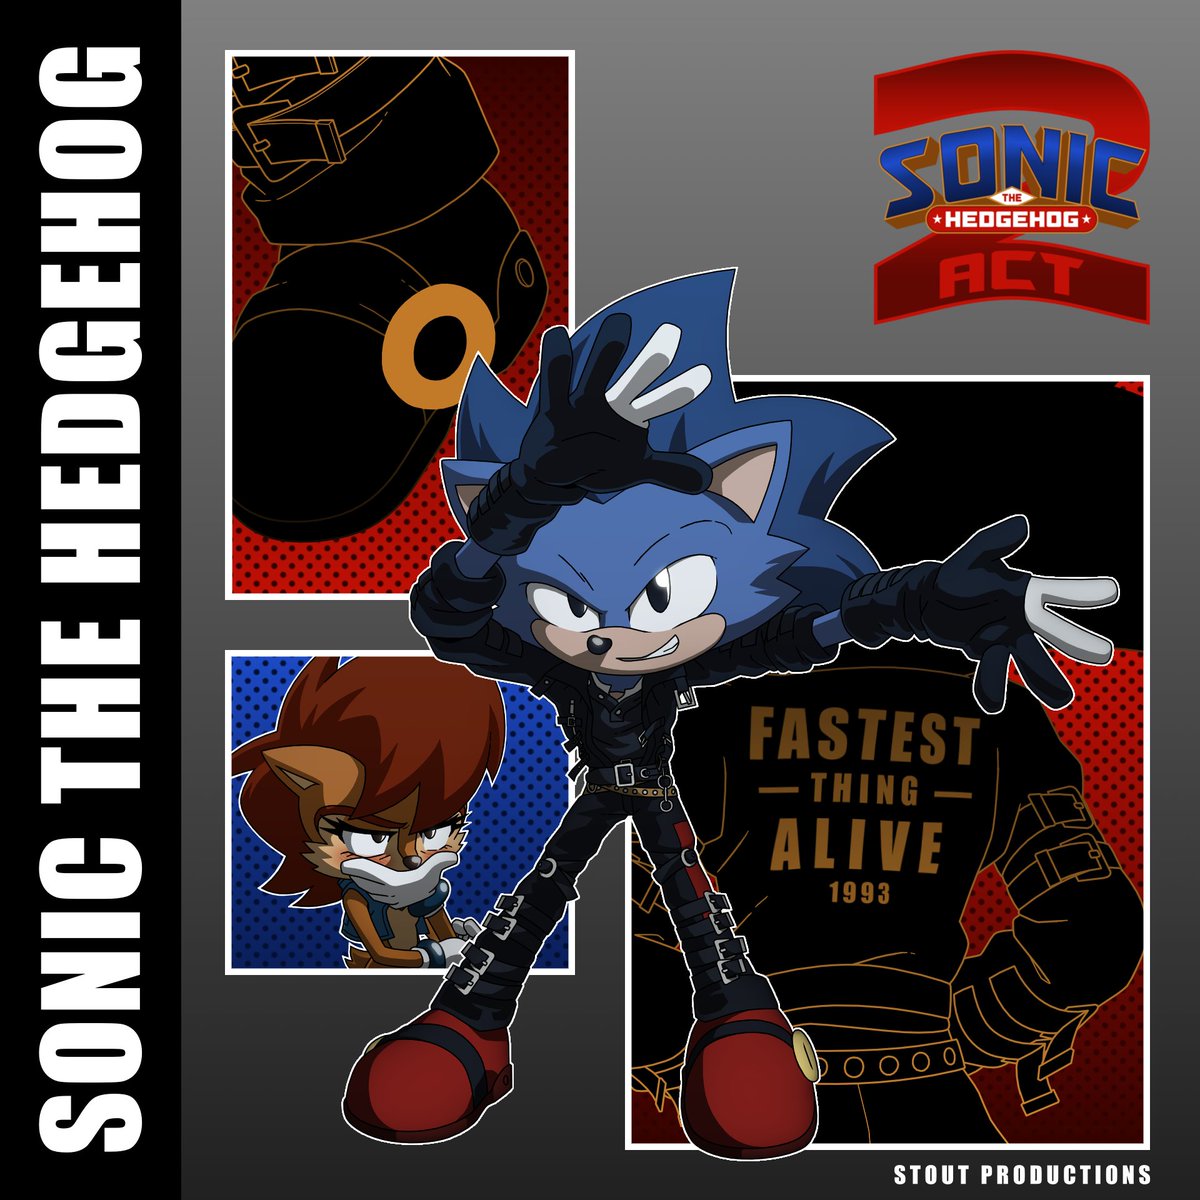 Here is the #Sonic the Speed Demon 'Album Cover' in it's full quality!

Listen to the full released track on YouTube!
#SonicAct2

#SonicTheHedgehog #SallyAcorn #sonicsatam #SonicPrime #SonicFrontiers #SonicMovie #rally4sally